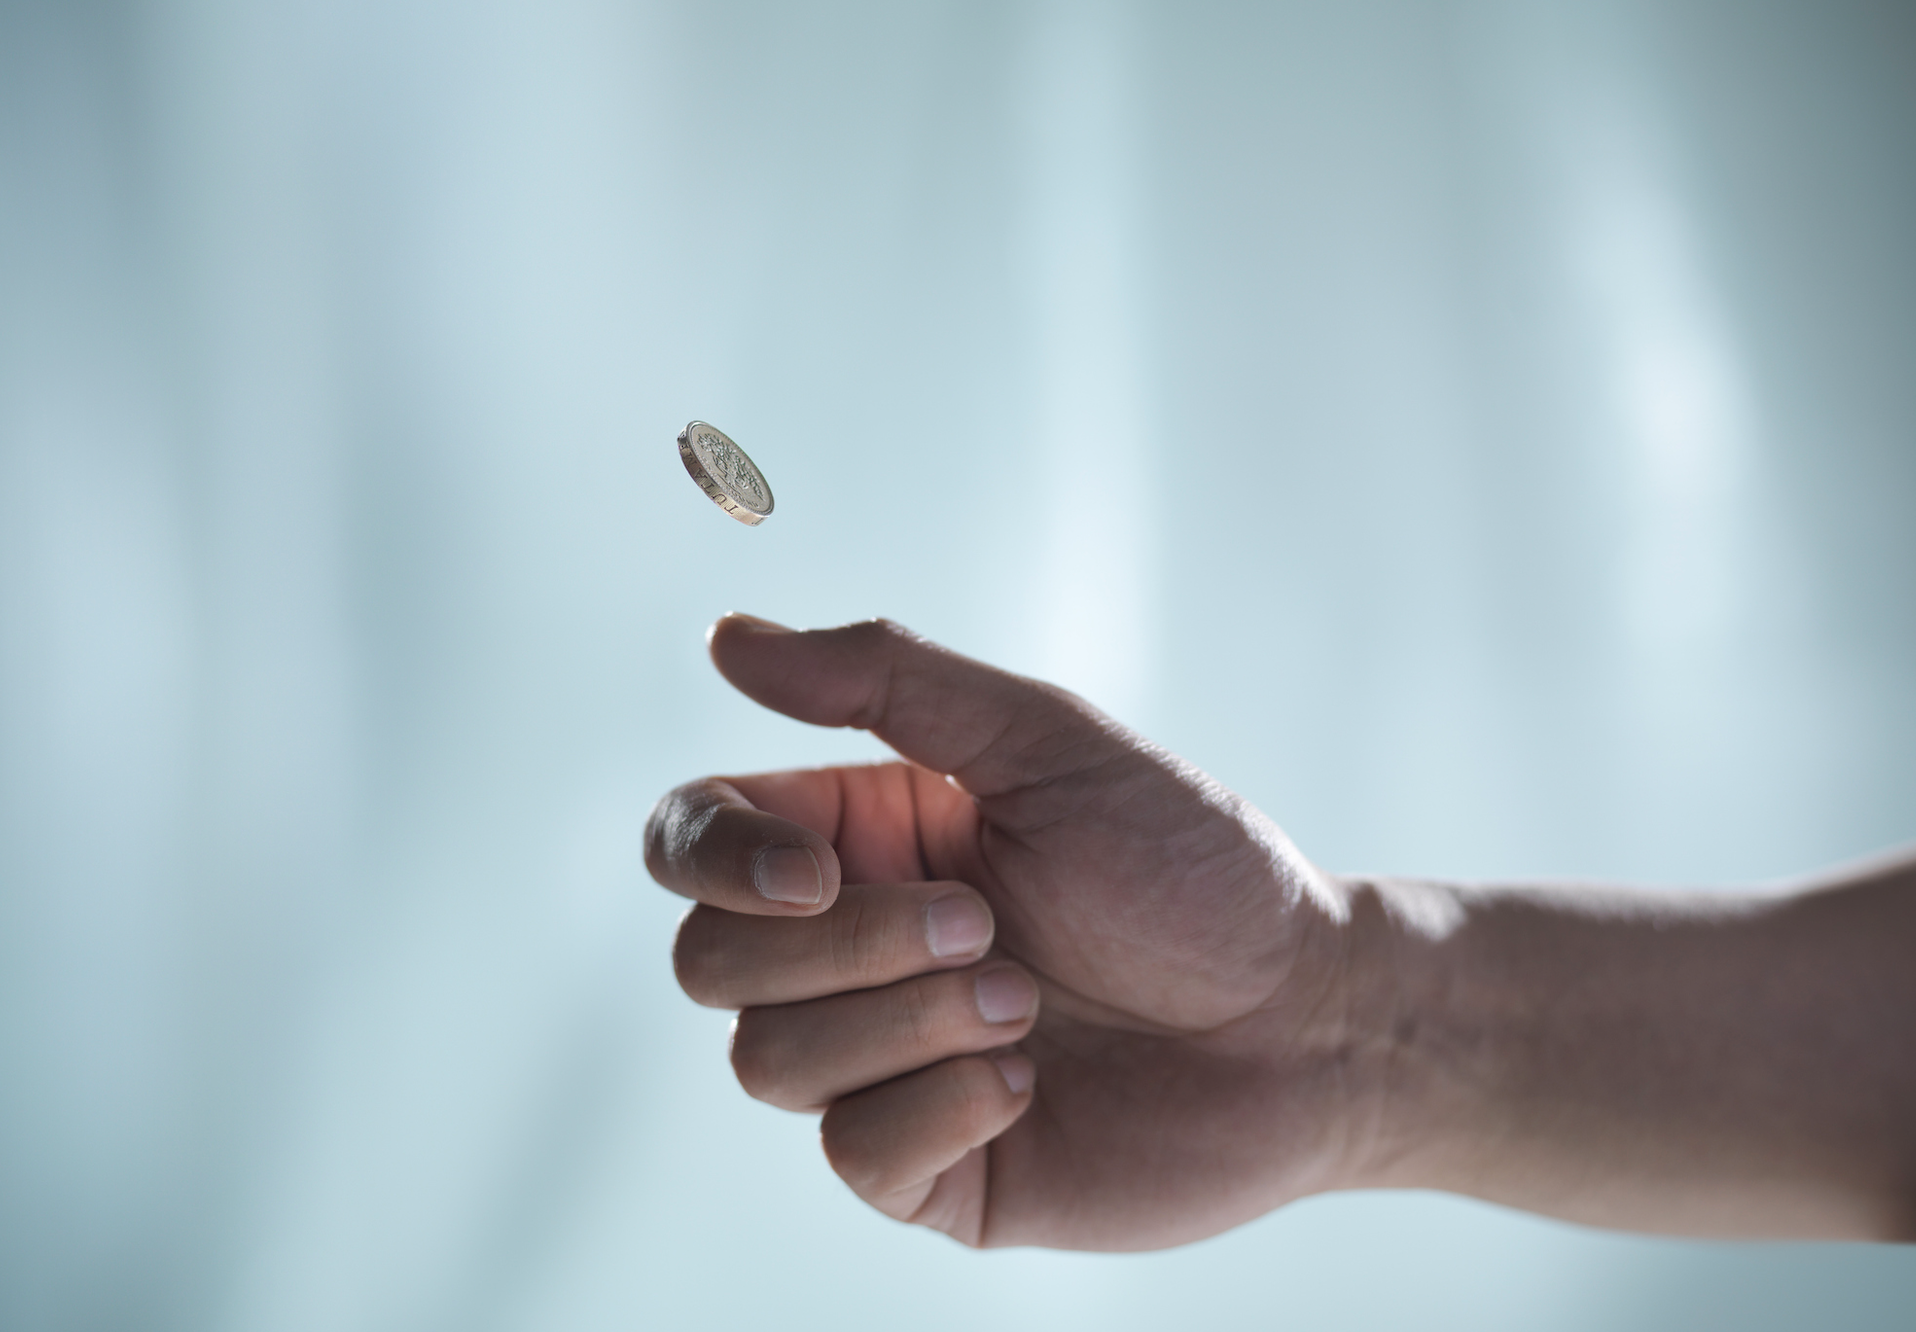 Photo of a hand flipping a coin that hangs in mid air.